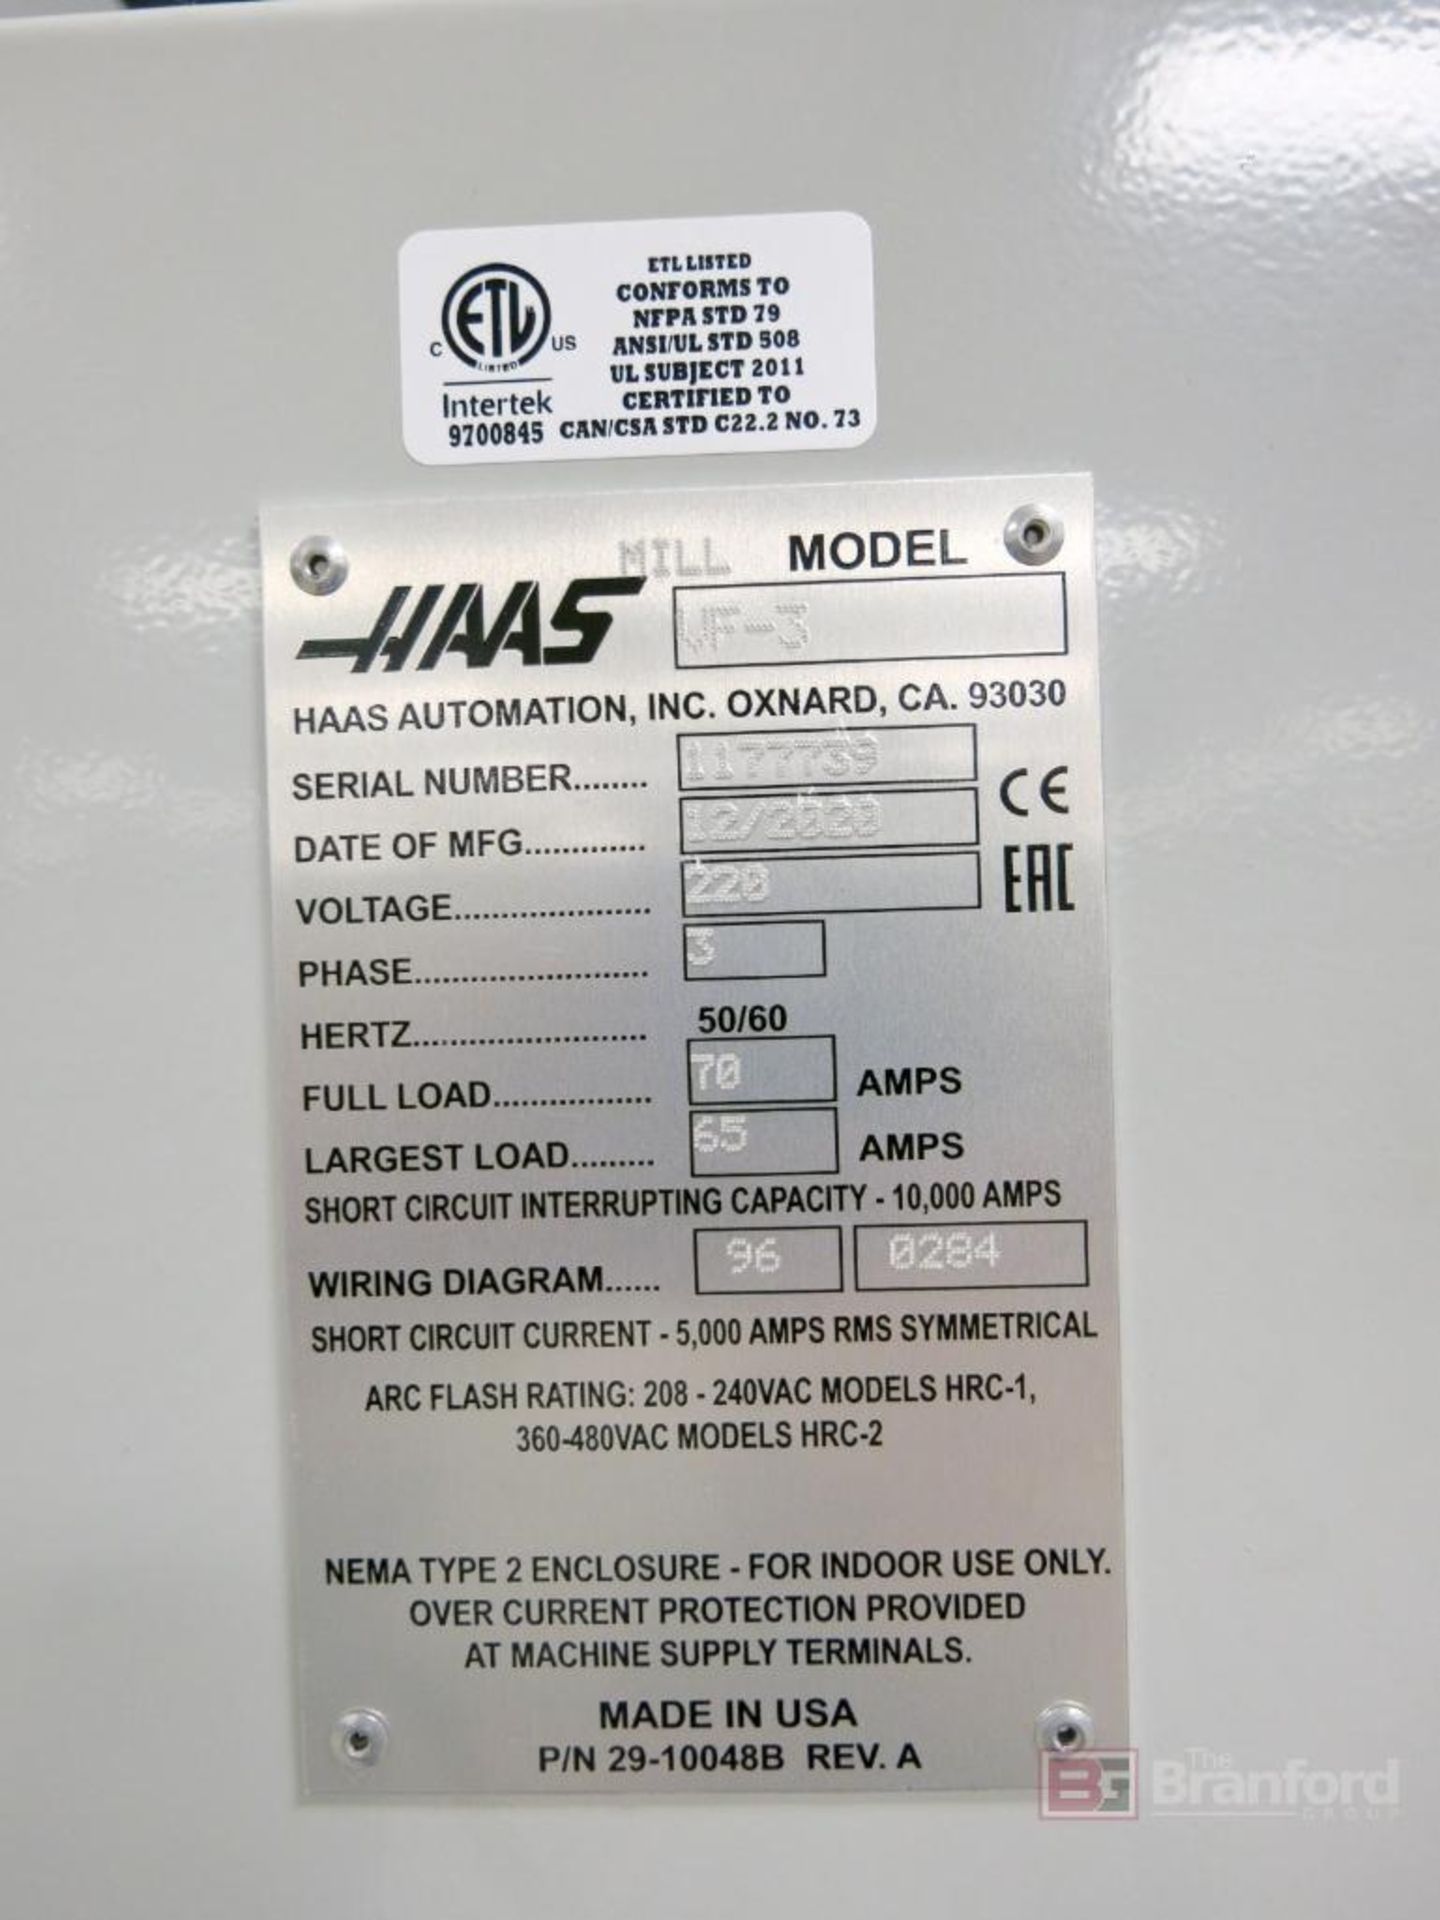 Haas Model VF3 CNC Machining Center - Image 18 of 18